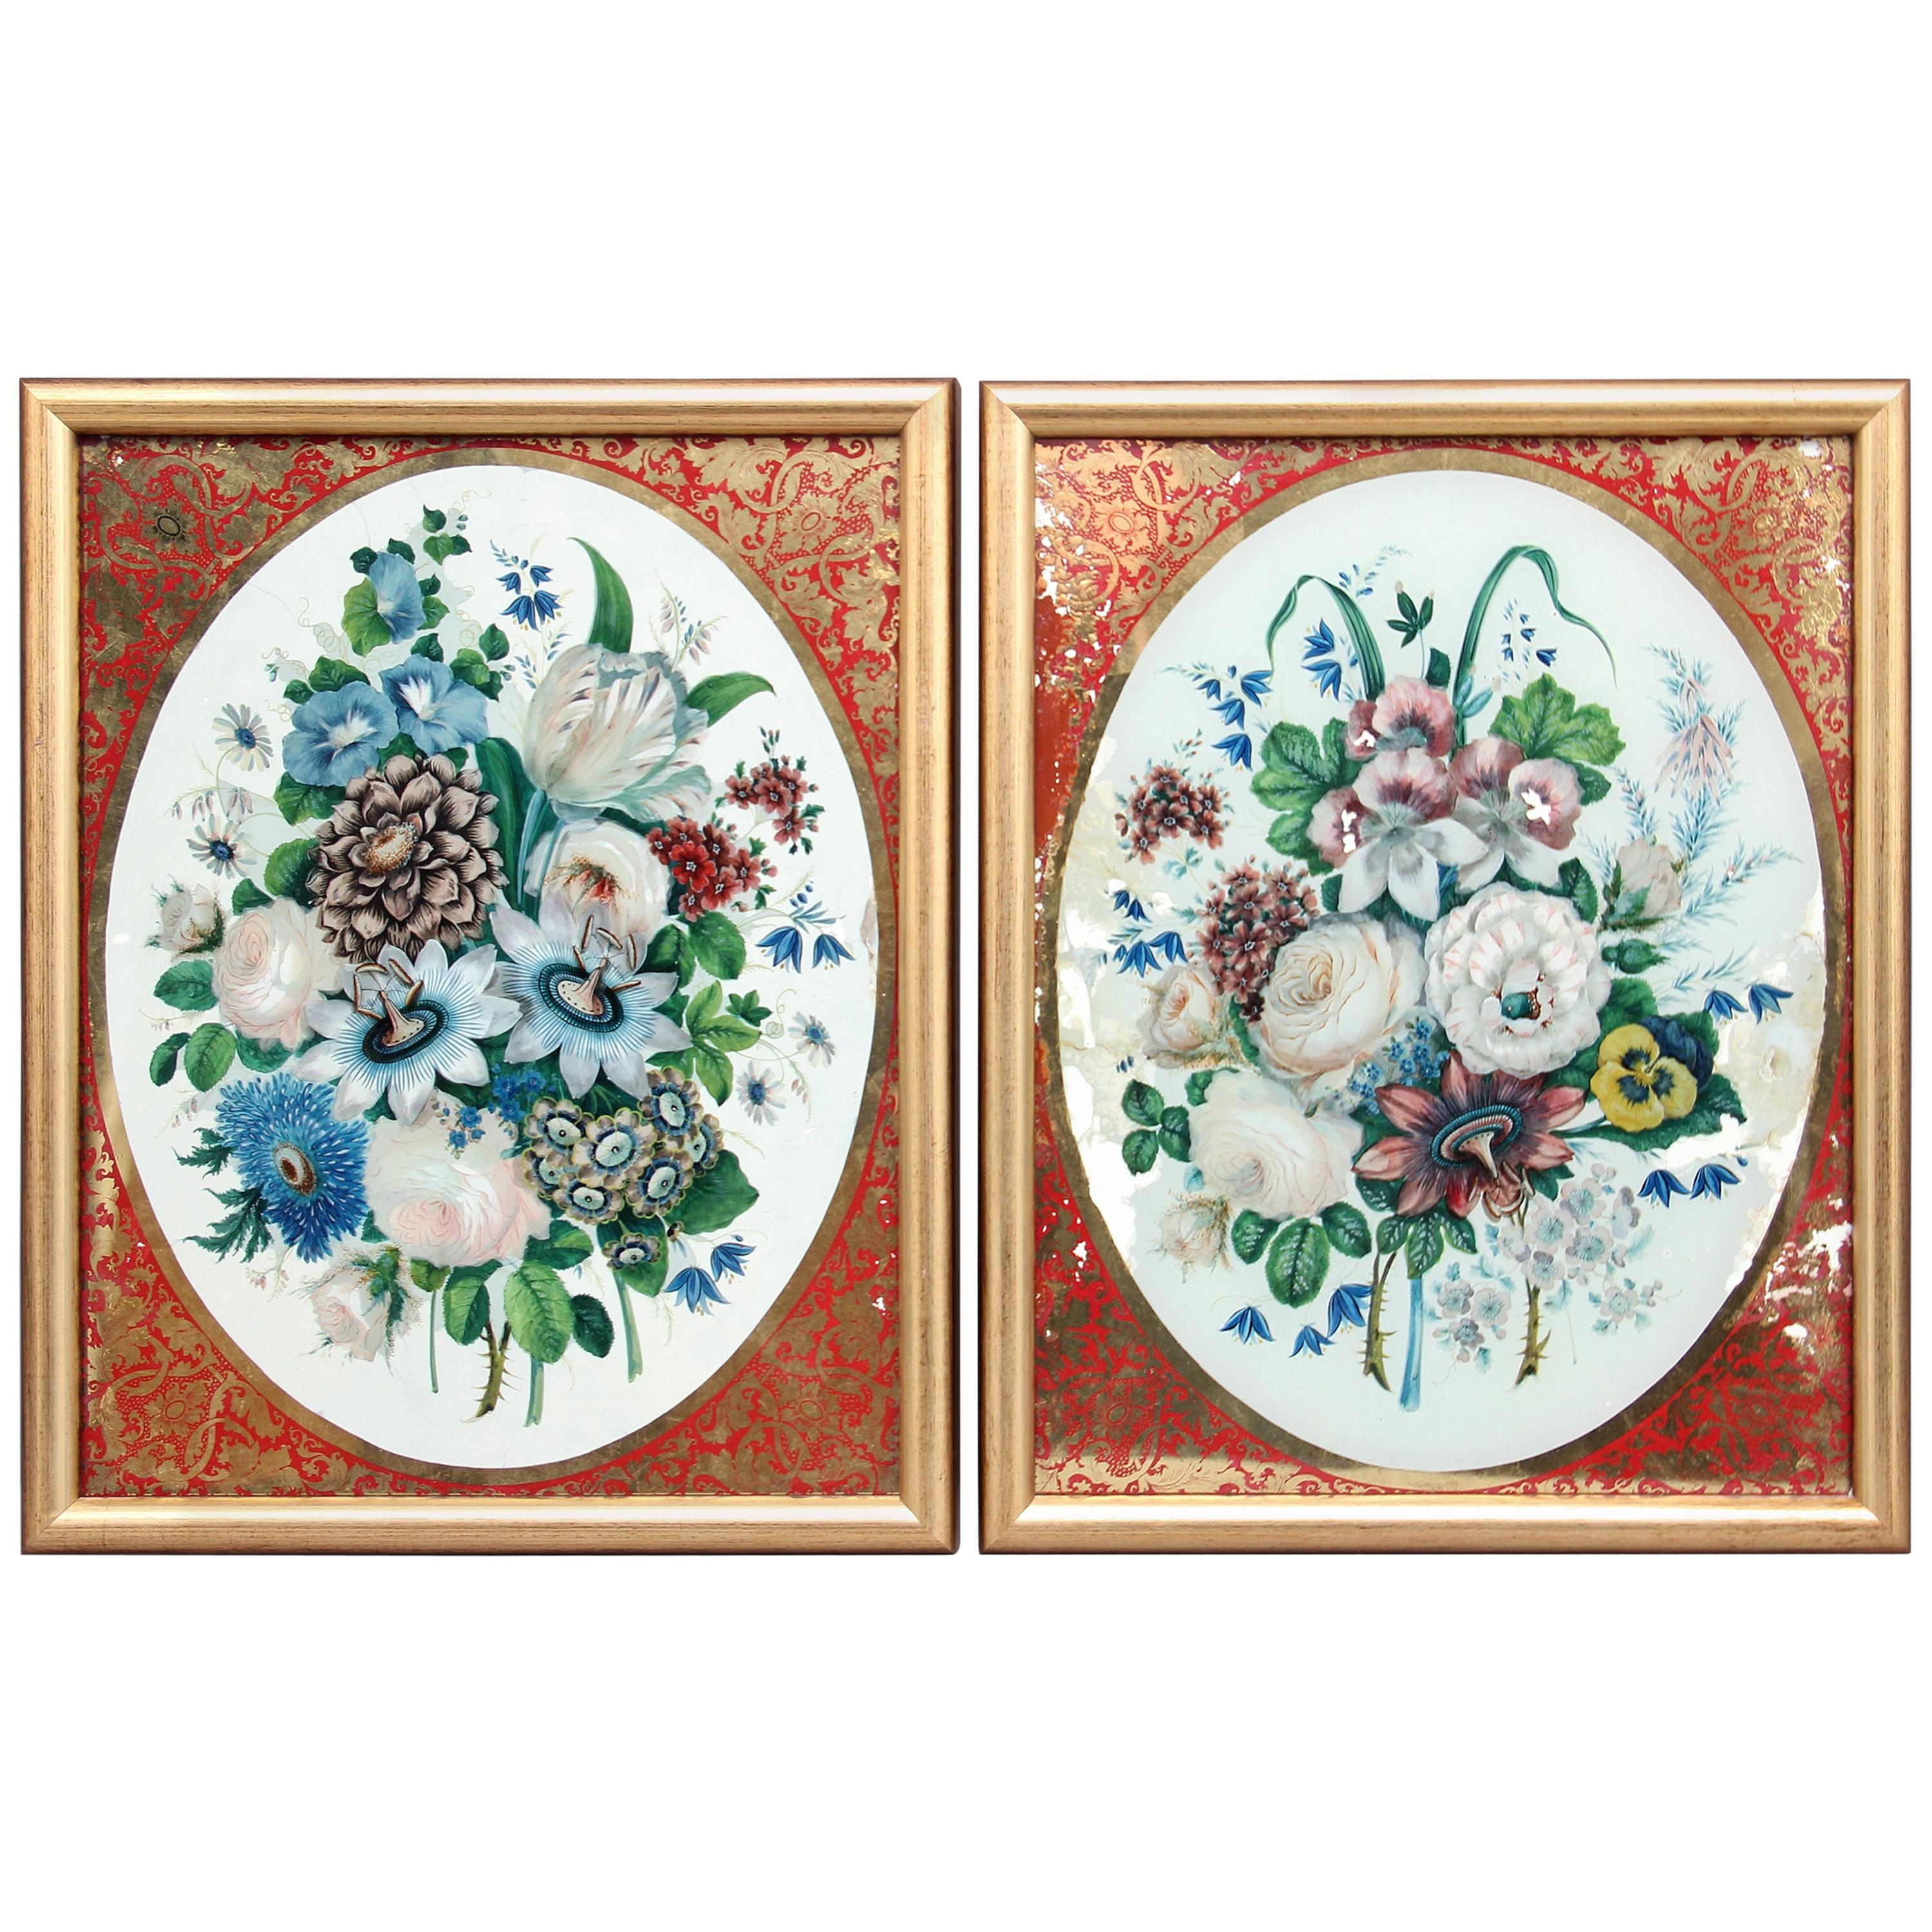 Pair of Early 19th Century Paintings